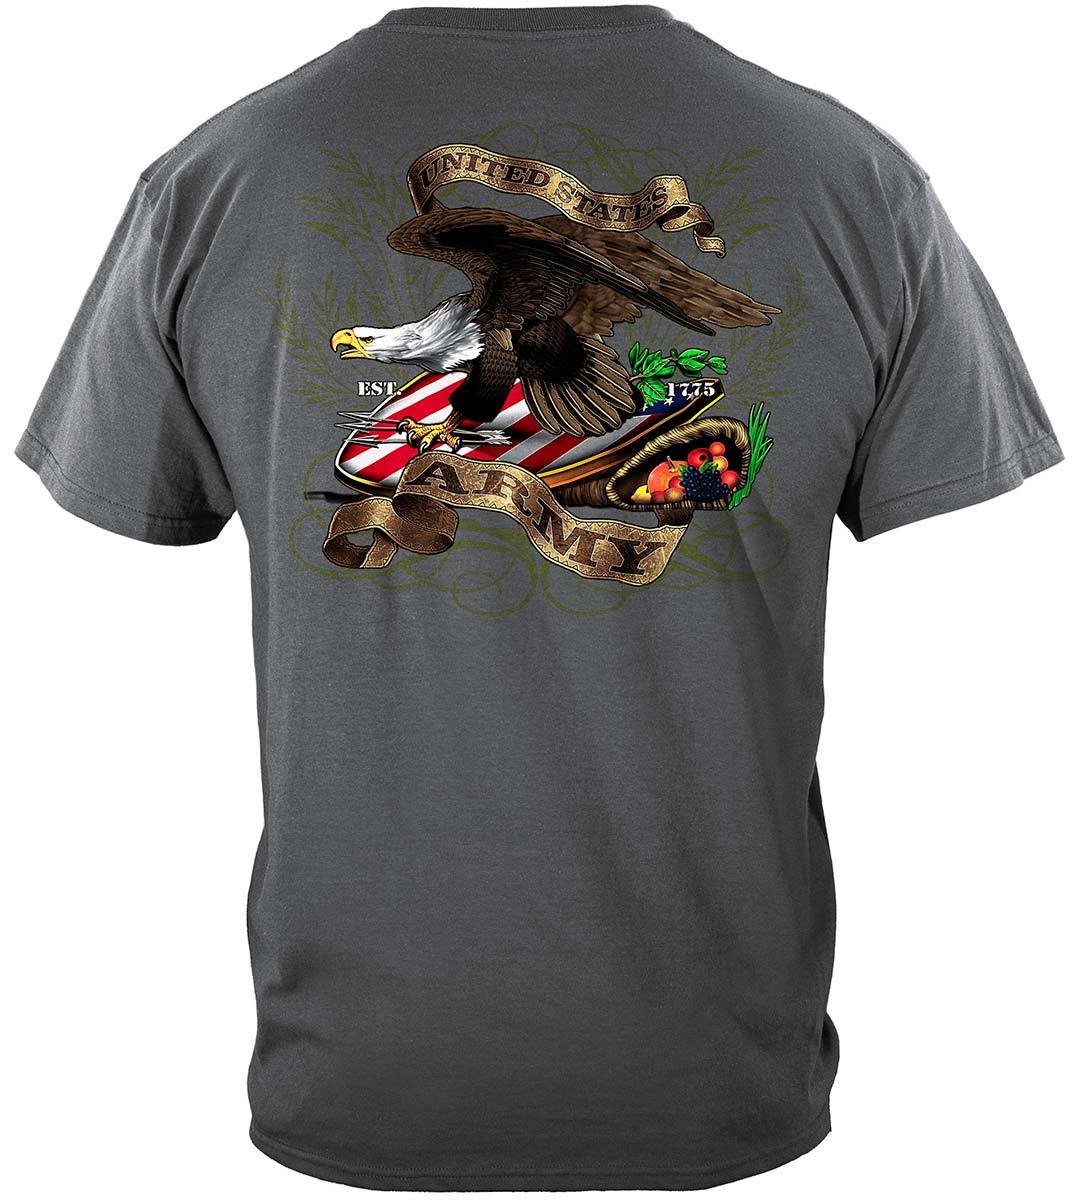 Army Shield And Eagle Premium Long Sleeves